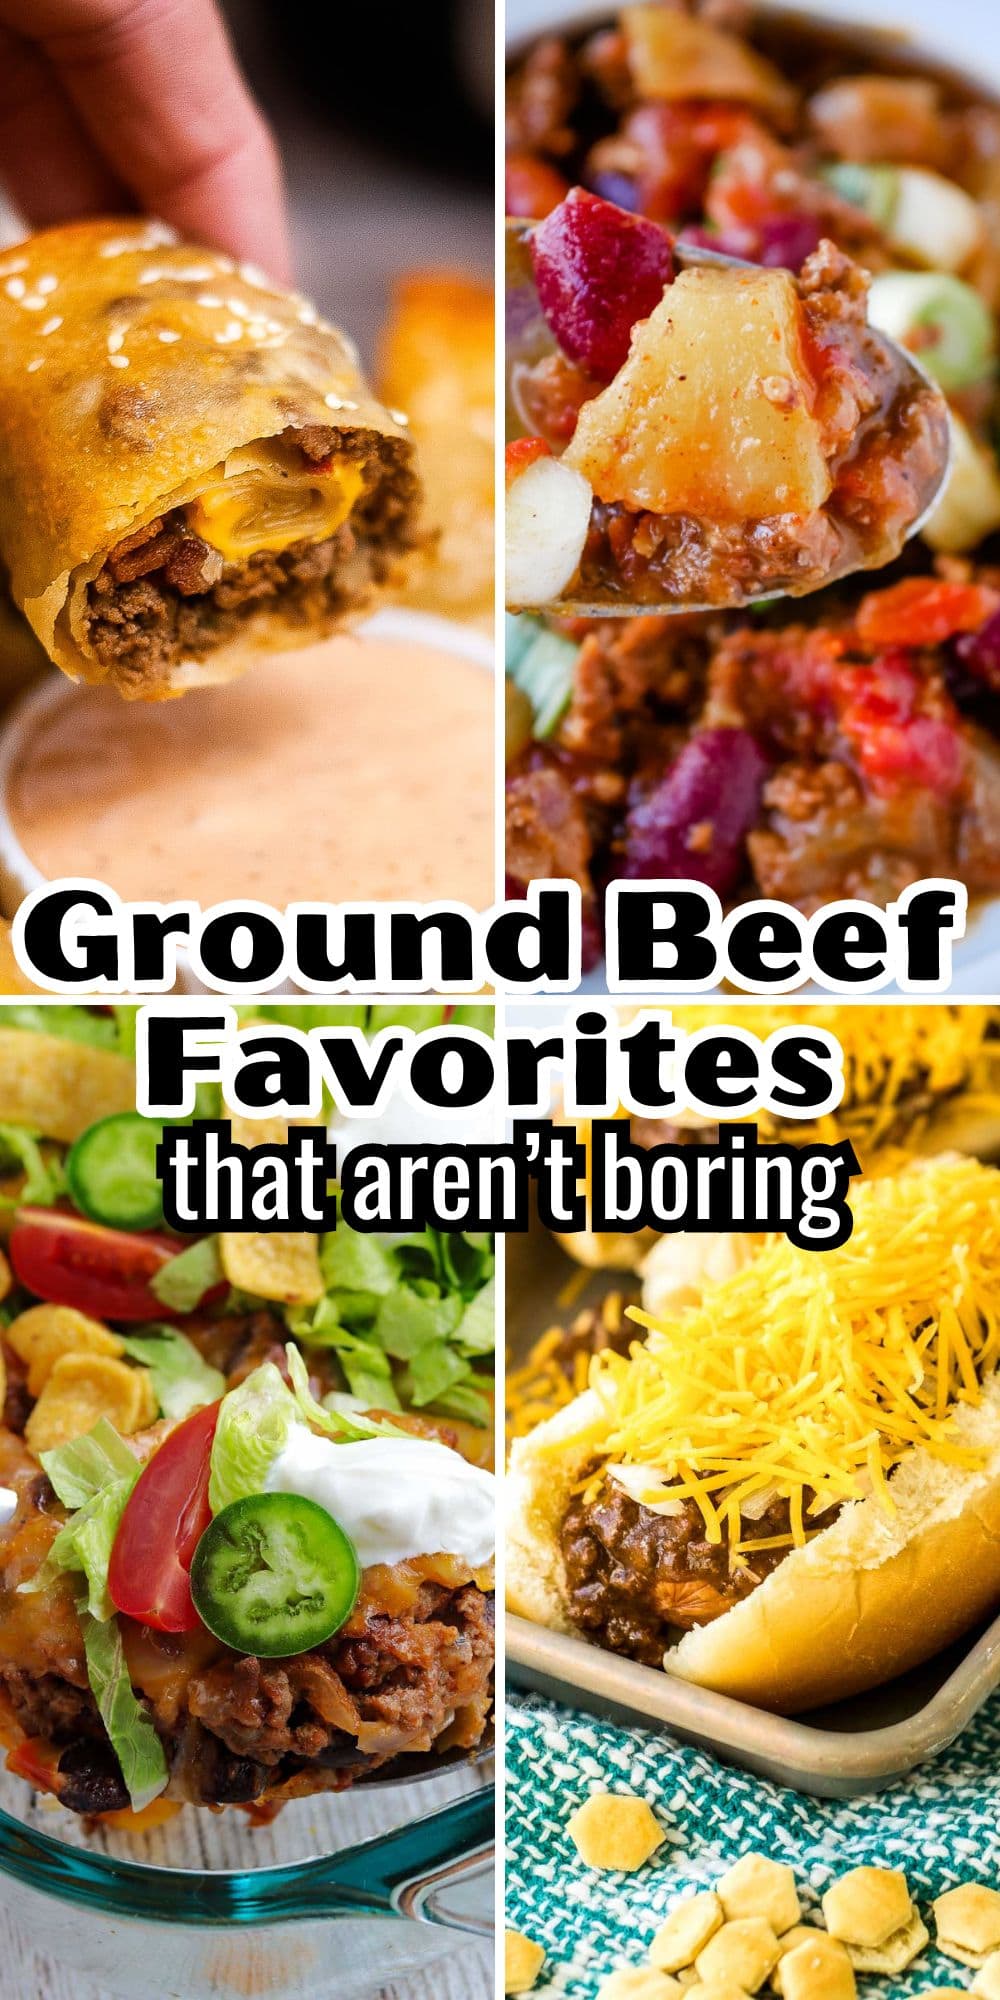 Get creative with these flavorful ground beef favorites that are anything but boring.